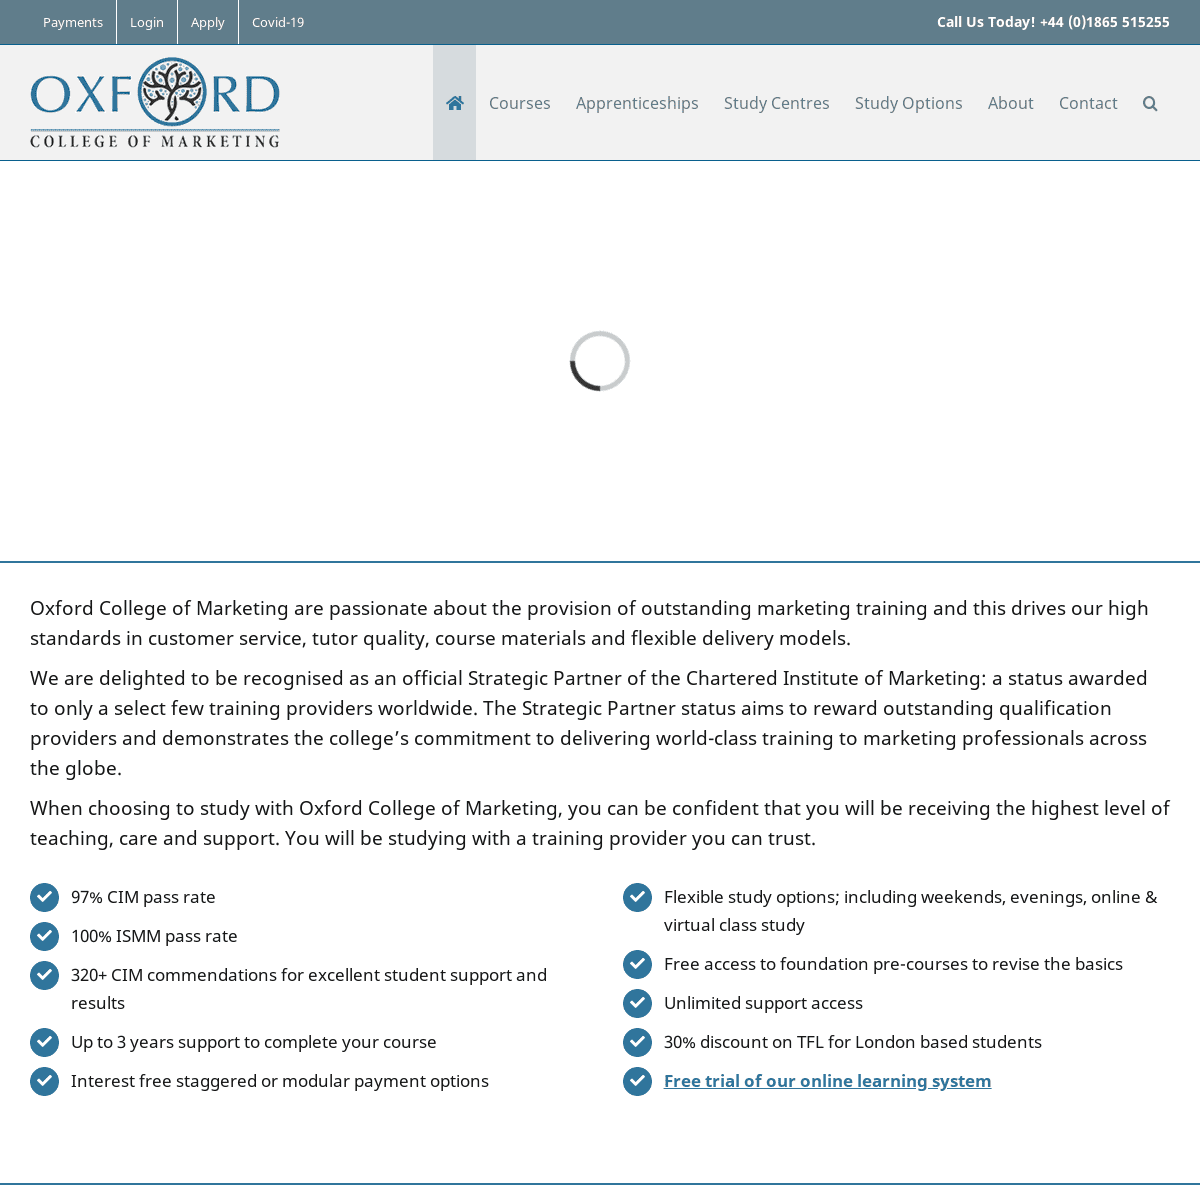 A complete backup of https://oxfordcollegeofmarketing.com